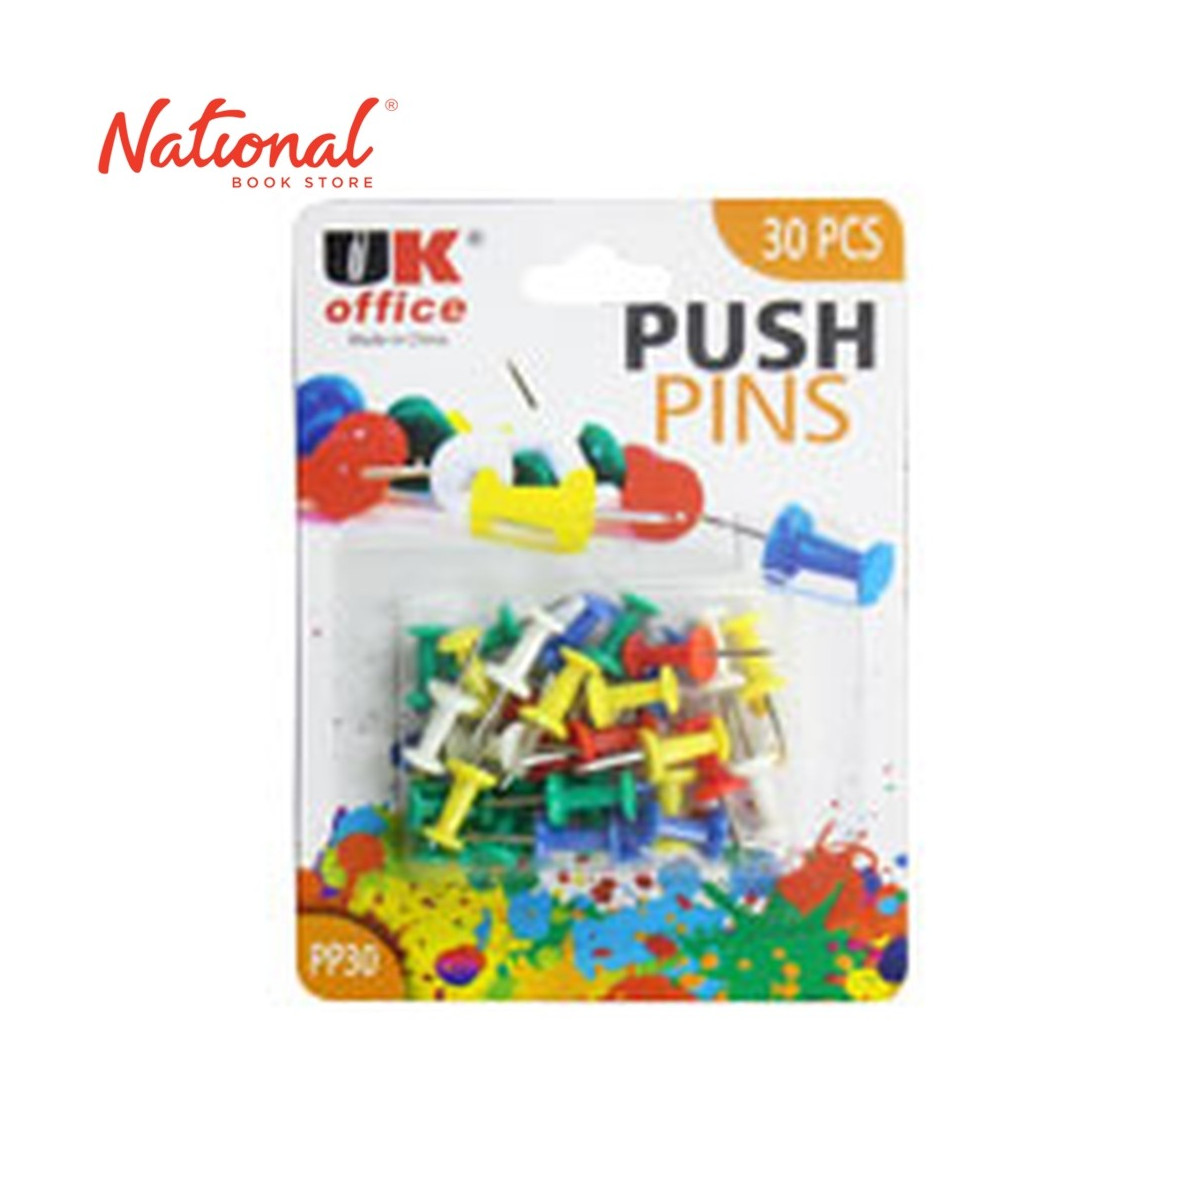 UK OFFICE PUSH PIN PP30 30S ASSORTED COLOR